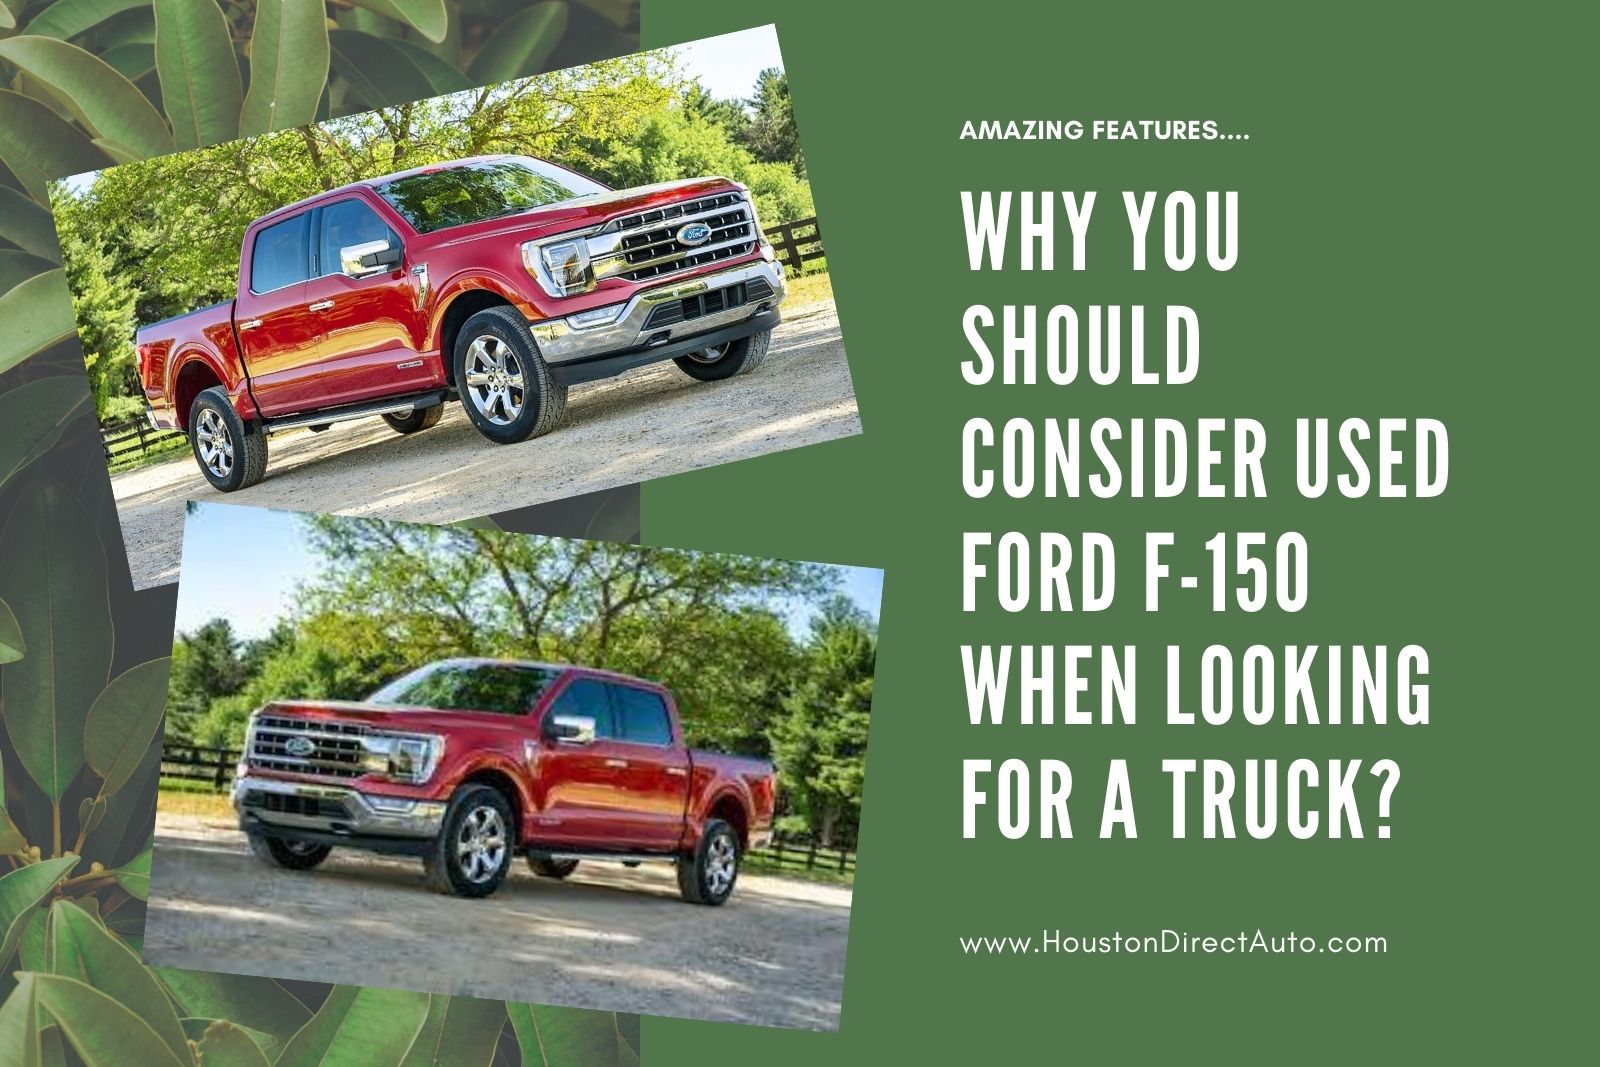 Why You Should Consider Used Ford F-150 When Looking For A Truck?